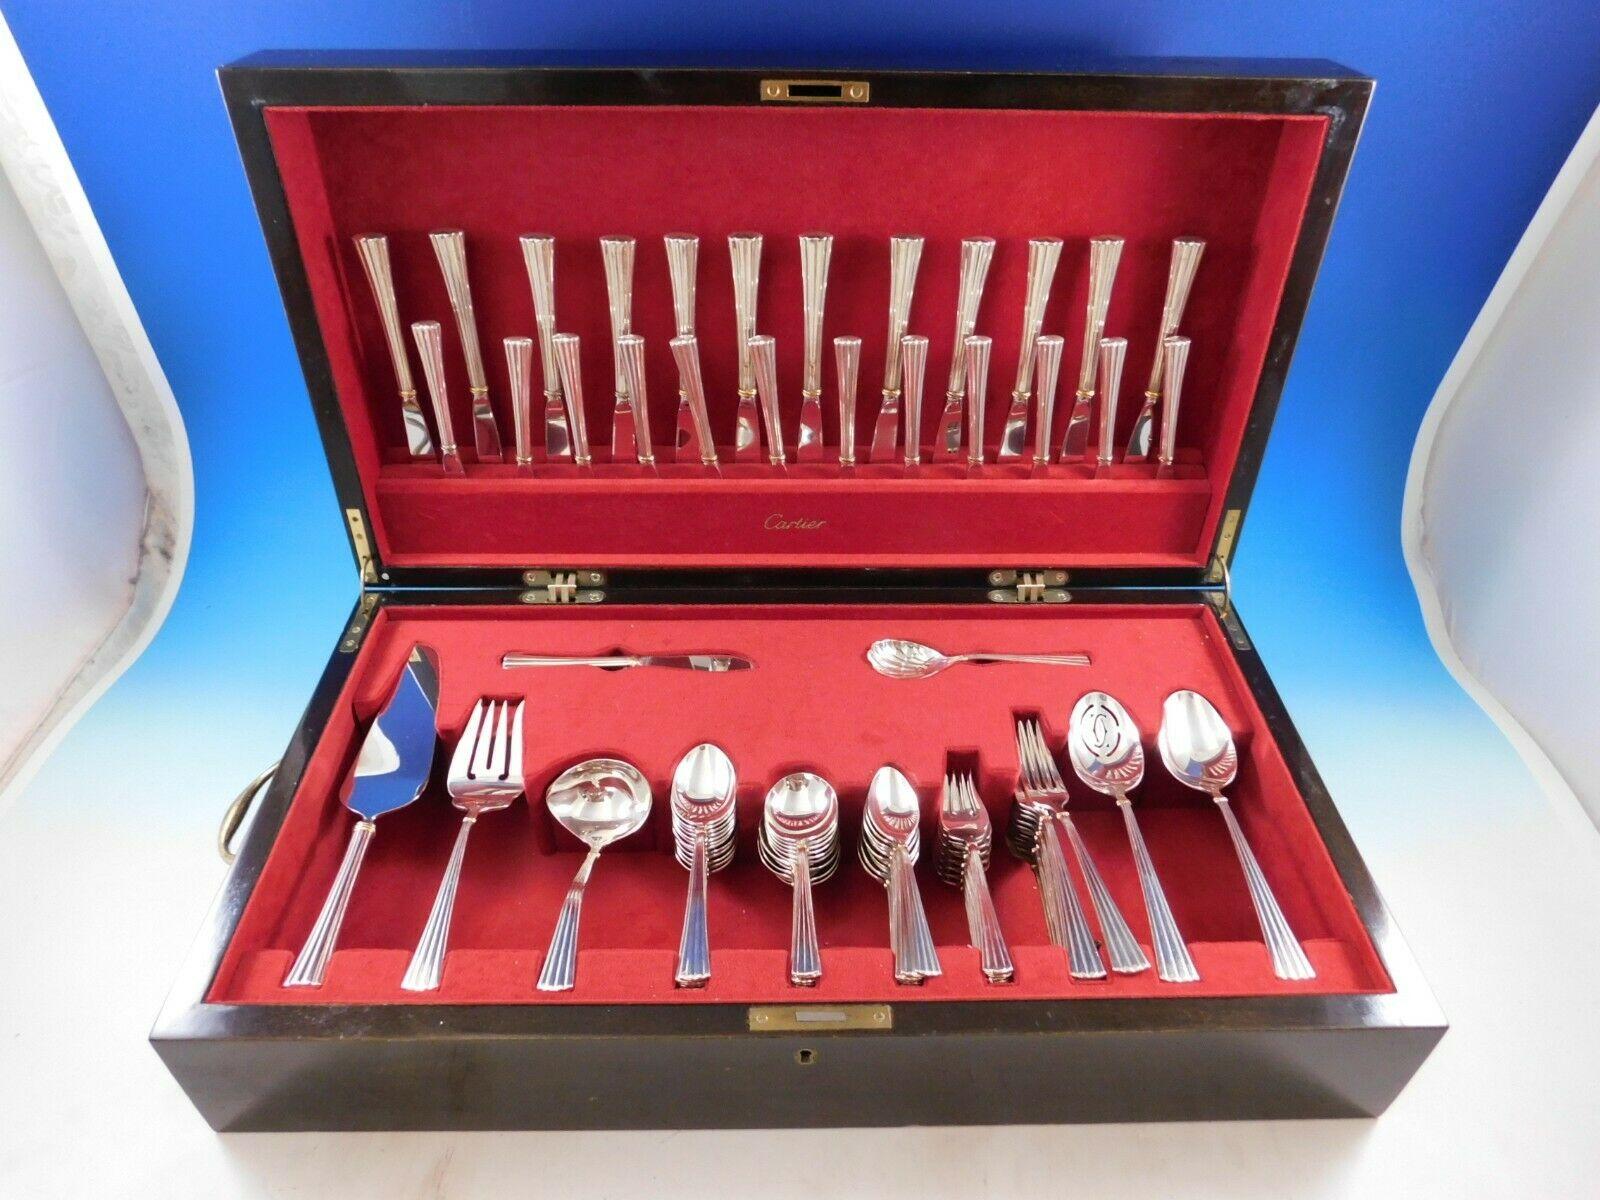 Superb Des Must Gold Accent by Cartier sterling silver Flatware set in fitted Cartier chest, 91 pieces. This set includes:

12 Dinner Knives, 9 1/2